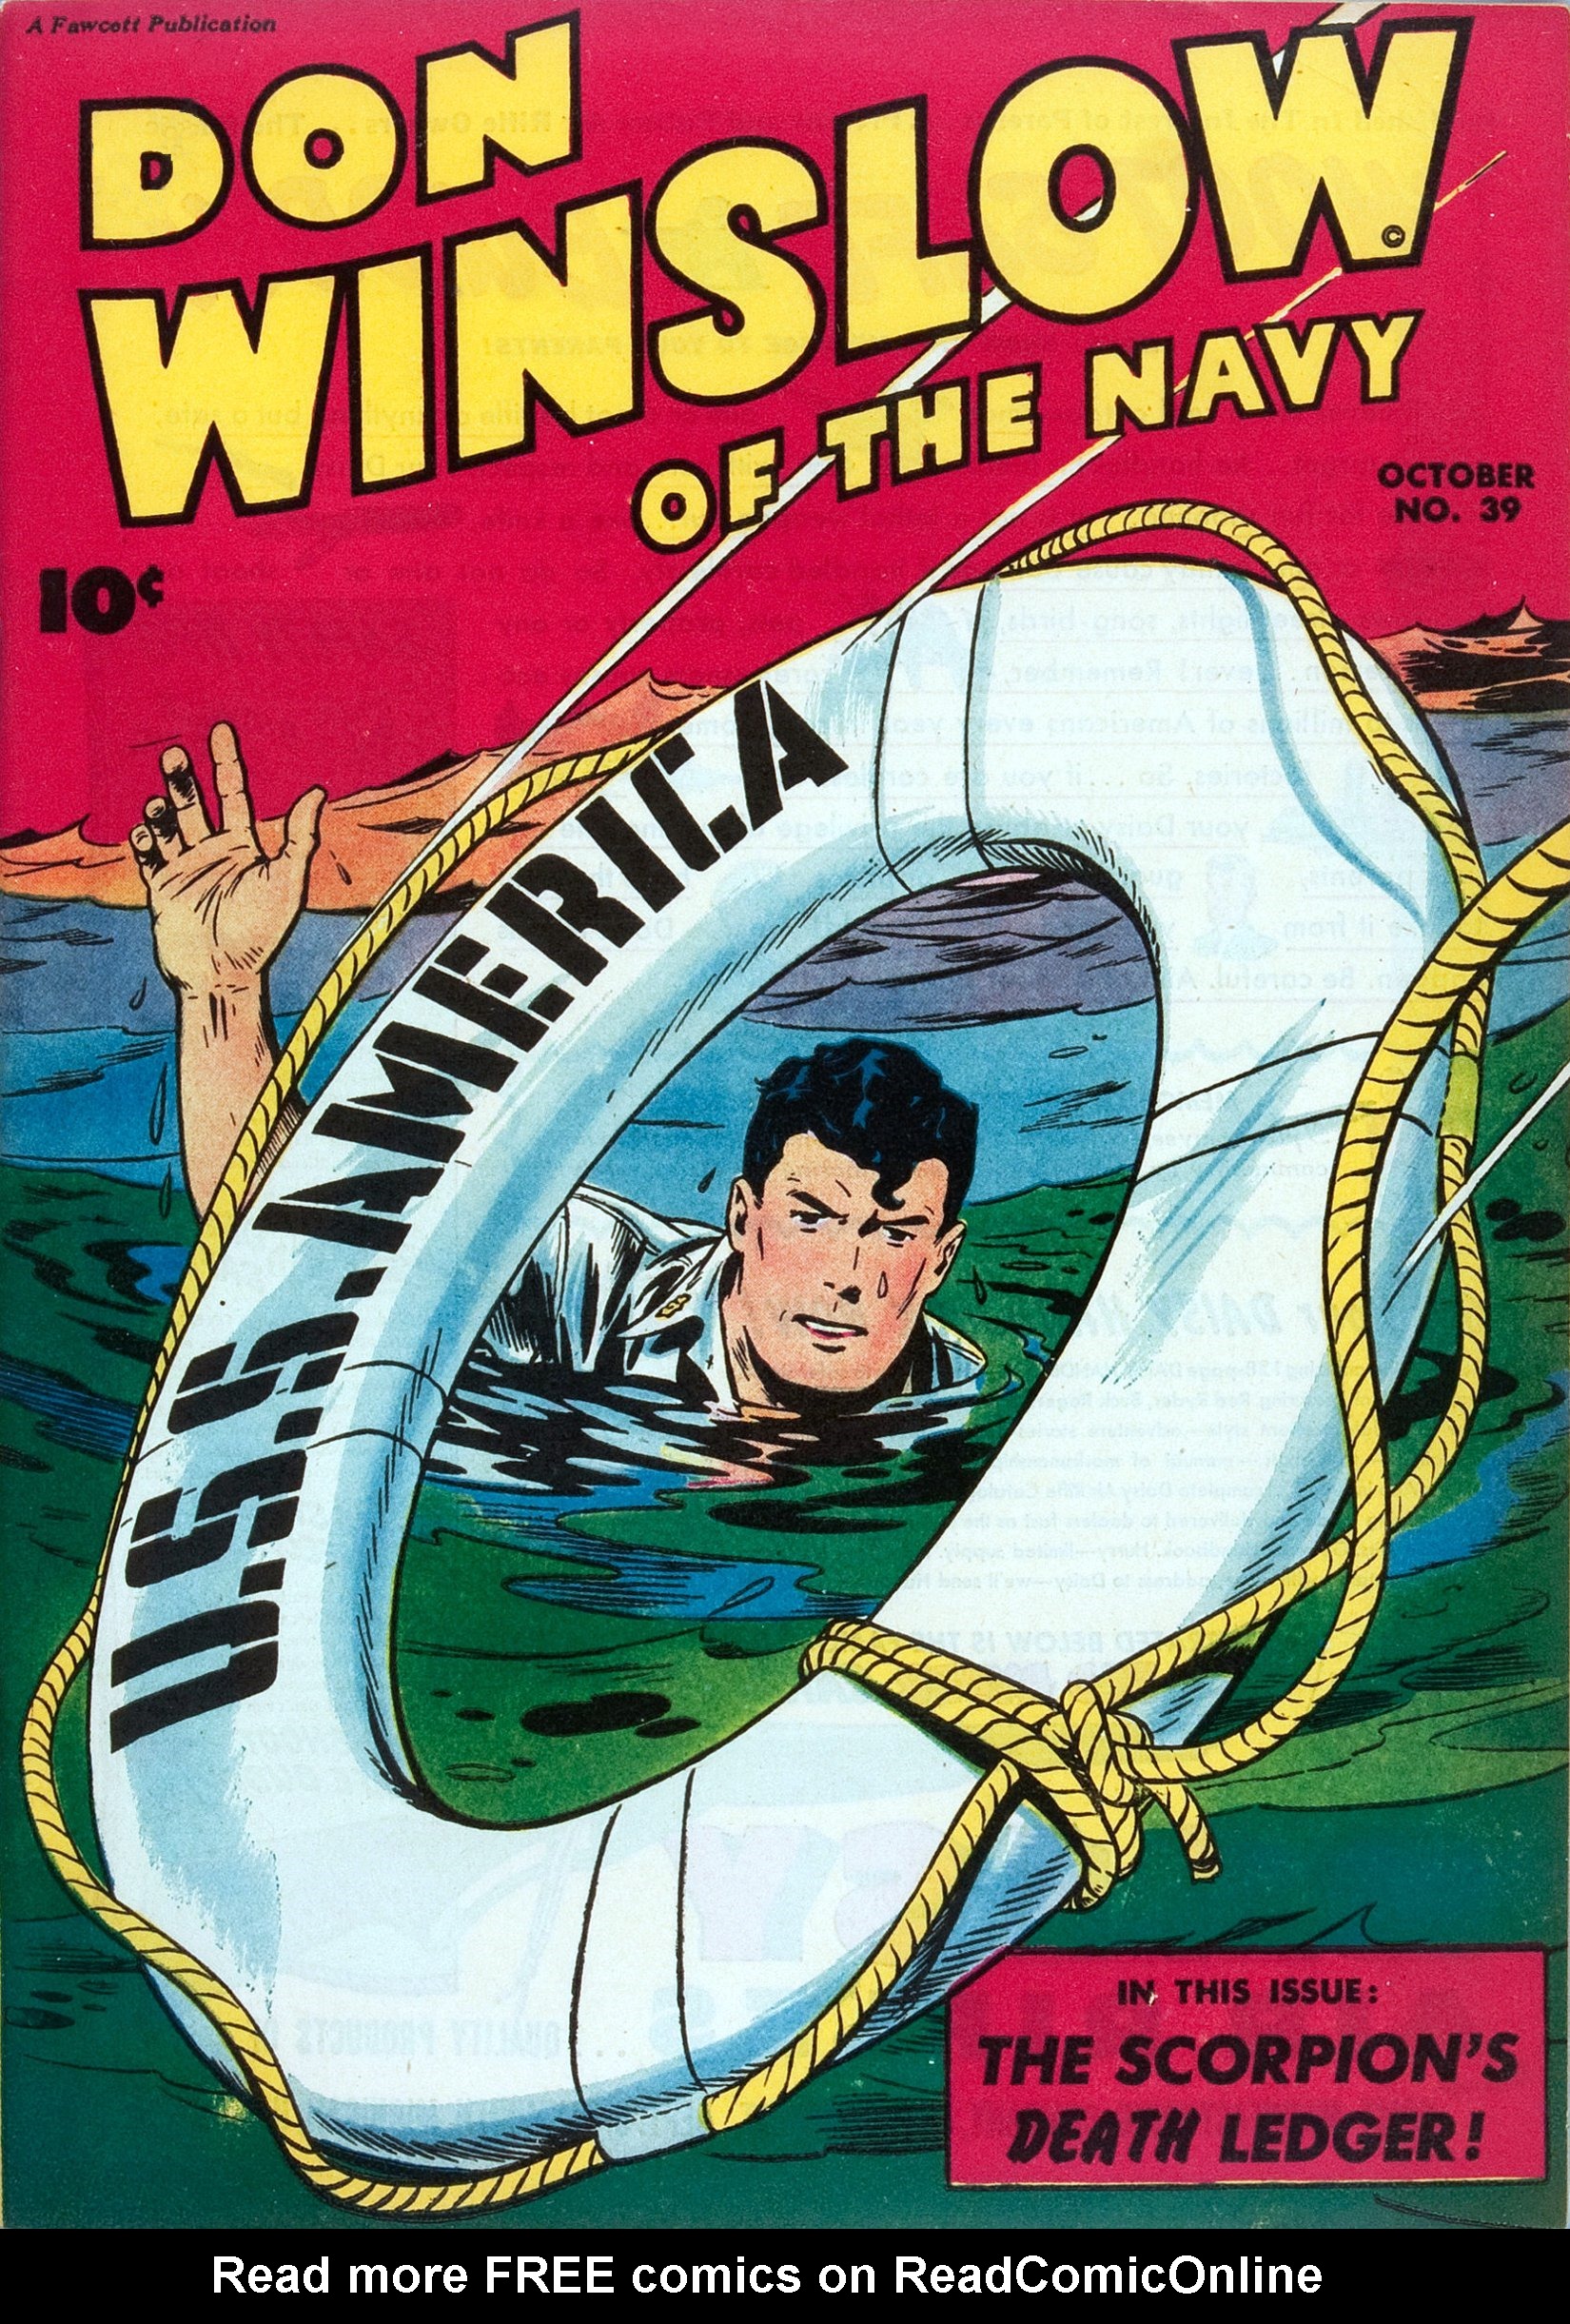 Read online Don Winslow of the Navy comic -  Issue #39 - 1